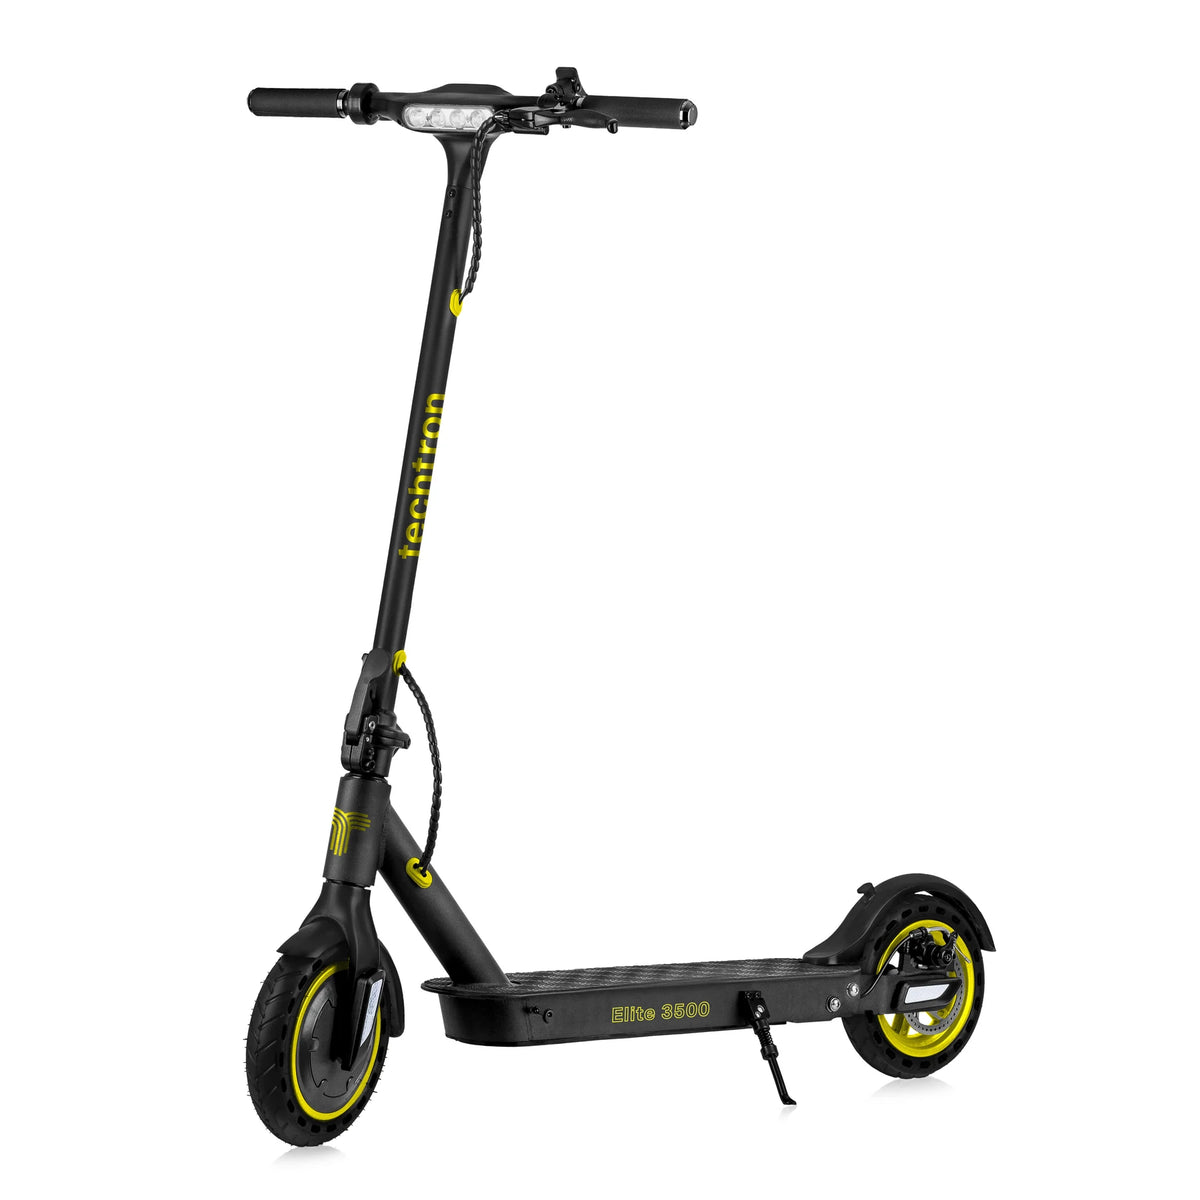 techtron® Elite 3500 Electric Scooter-Electric Scooters London